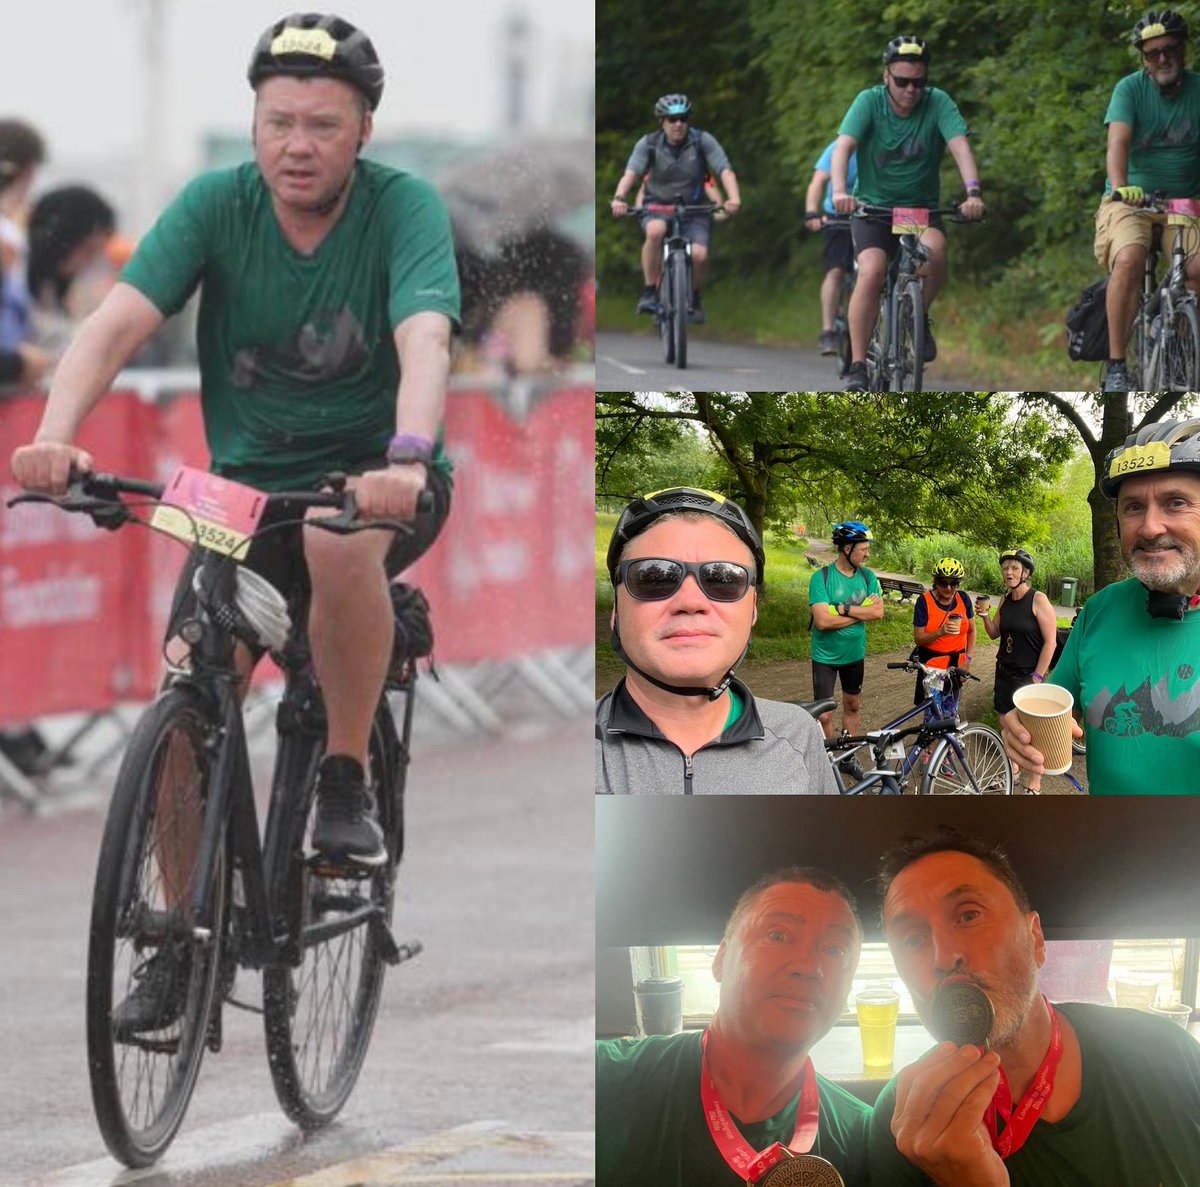 A few pics of me and four intrepid friends from the @TheBHF #LondontoBrighton bike ride yesterday. 

We all finished despite some puncture drama and an absolute lashing from the rain in an attritional last 10 miles ⛆

Ditchling beacon conquered on-bike, pain etched on  face!🤣